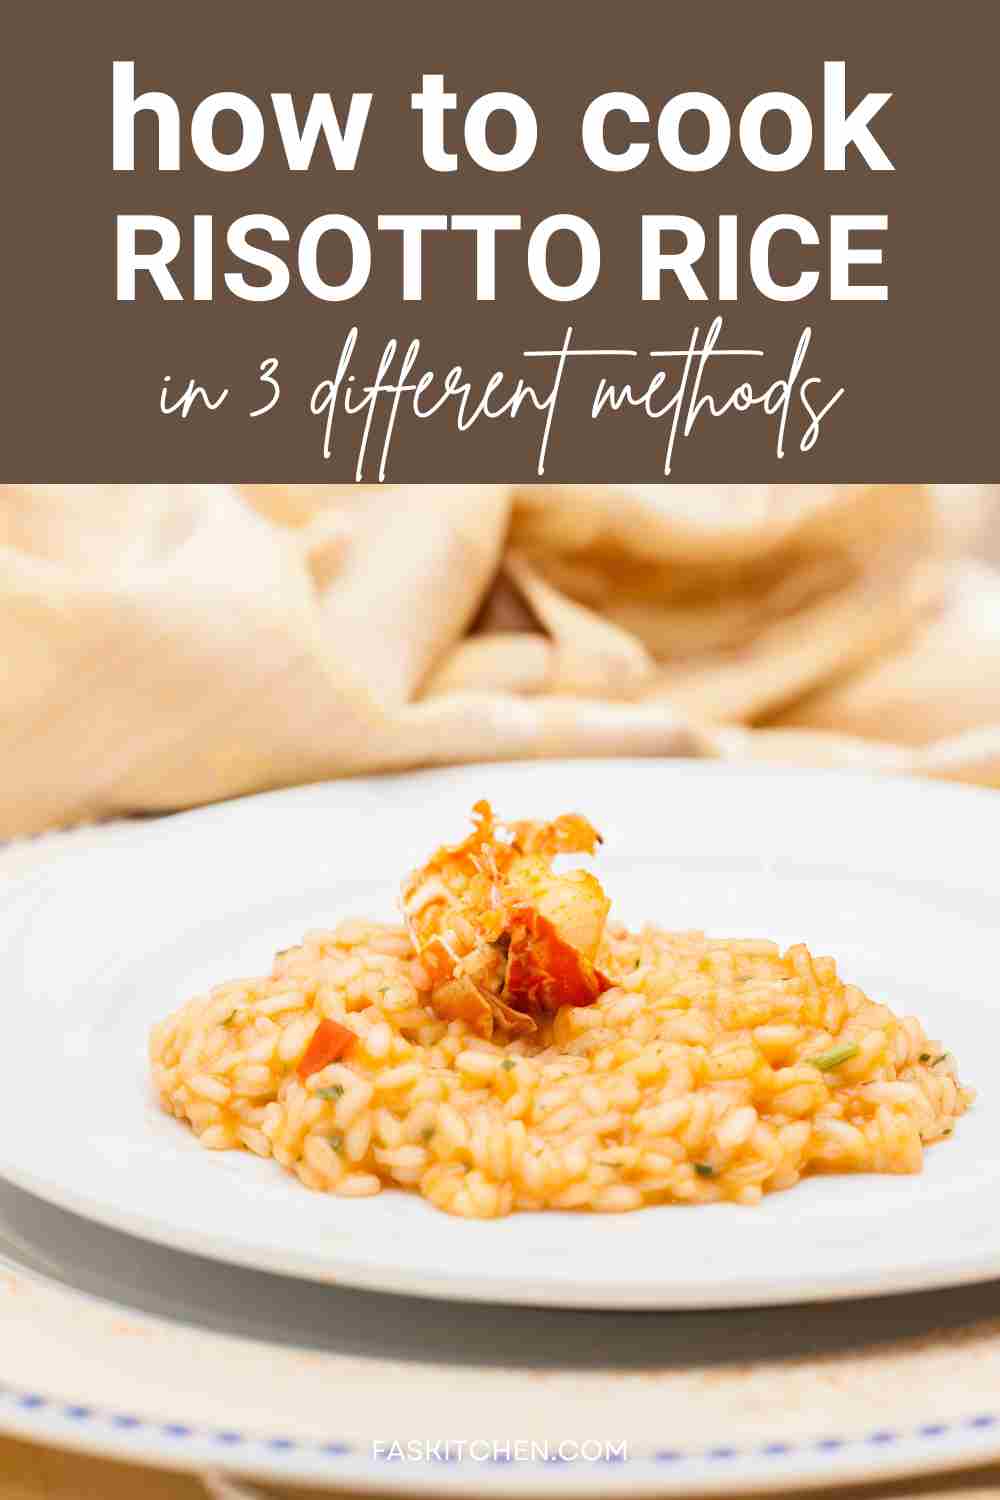 cooking risotto rice